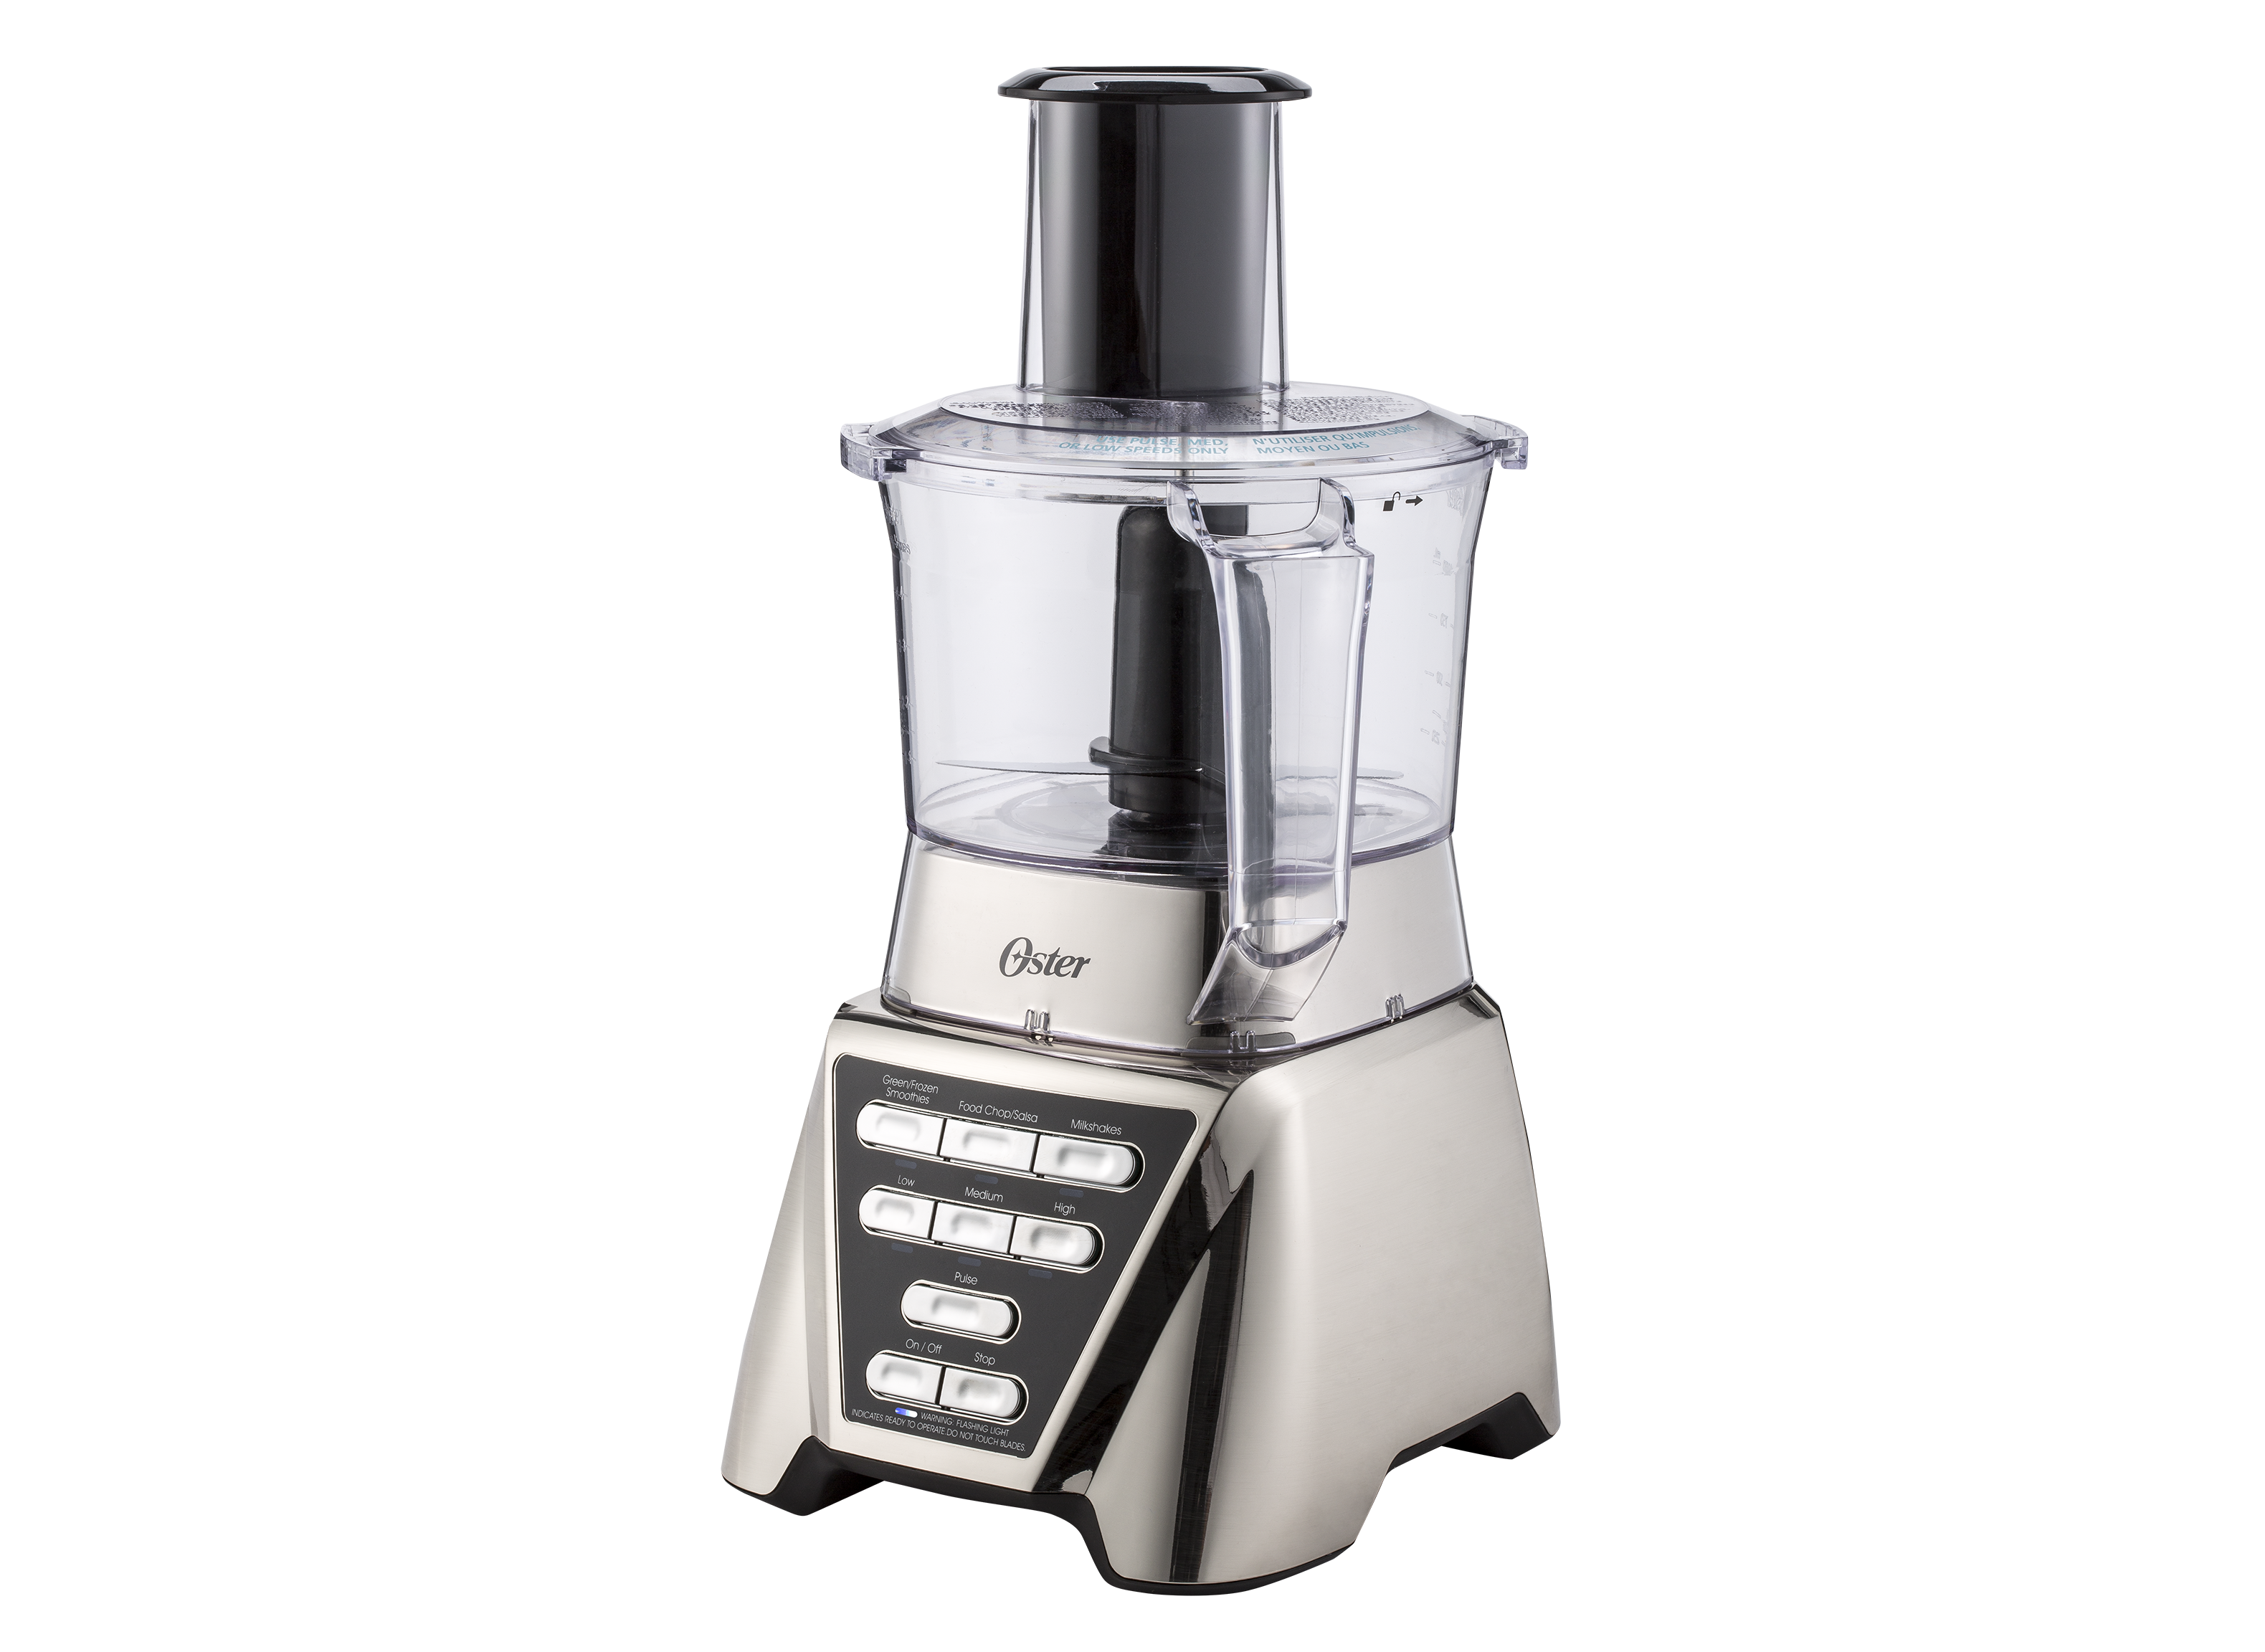 https://crdms.images.consumerreports.org/prod/products/cr/models/387446-foodprocessors-oster-pro1200plusfoodprocessorattachmentblstmbcbf000.png